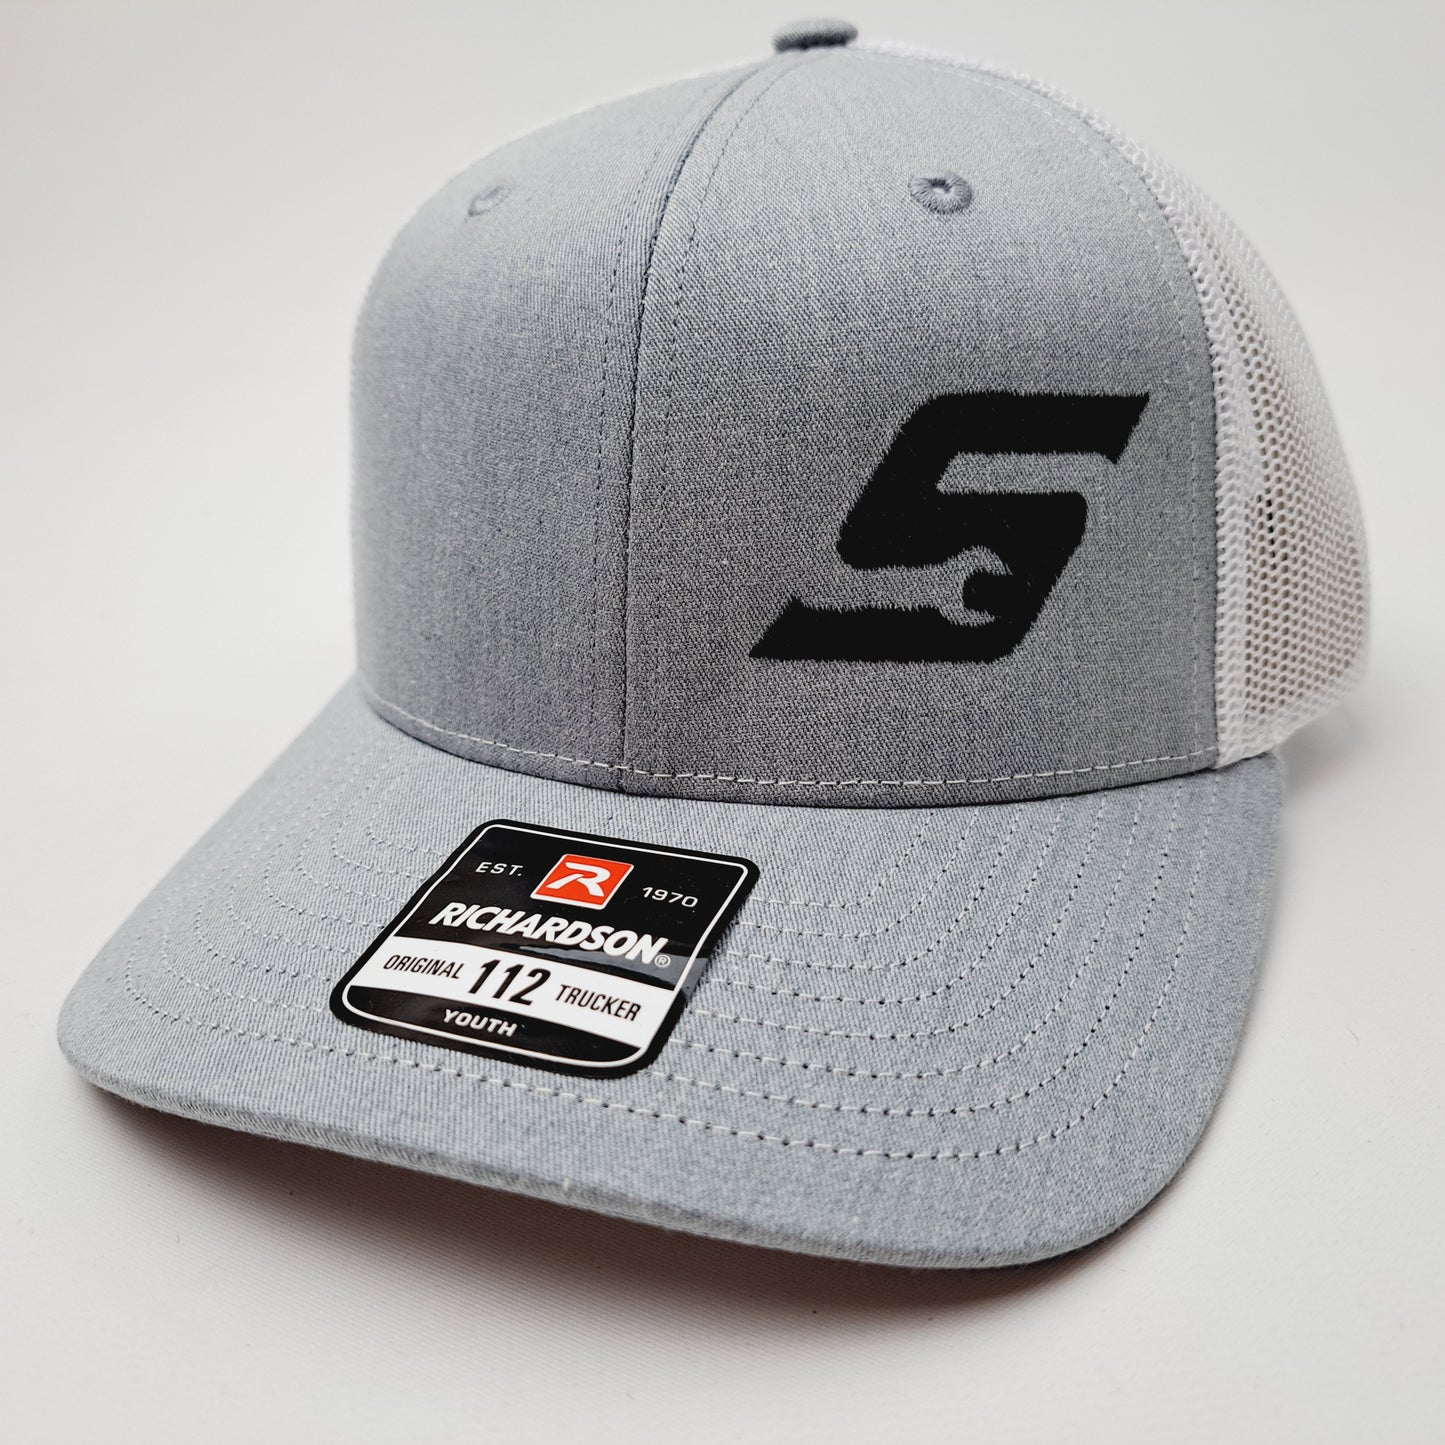 Snap On Snap-On Embroidered Richardson 112 Youth Curved Bill Trucker Mesh Snapback Cap Hat Heather Gray